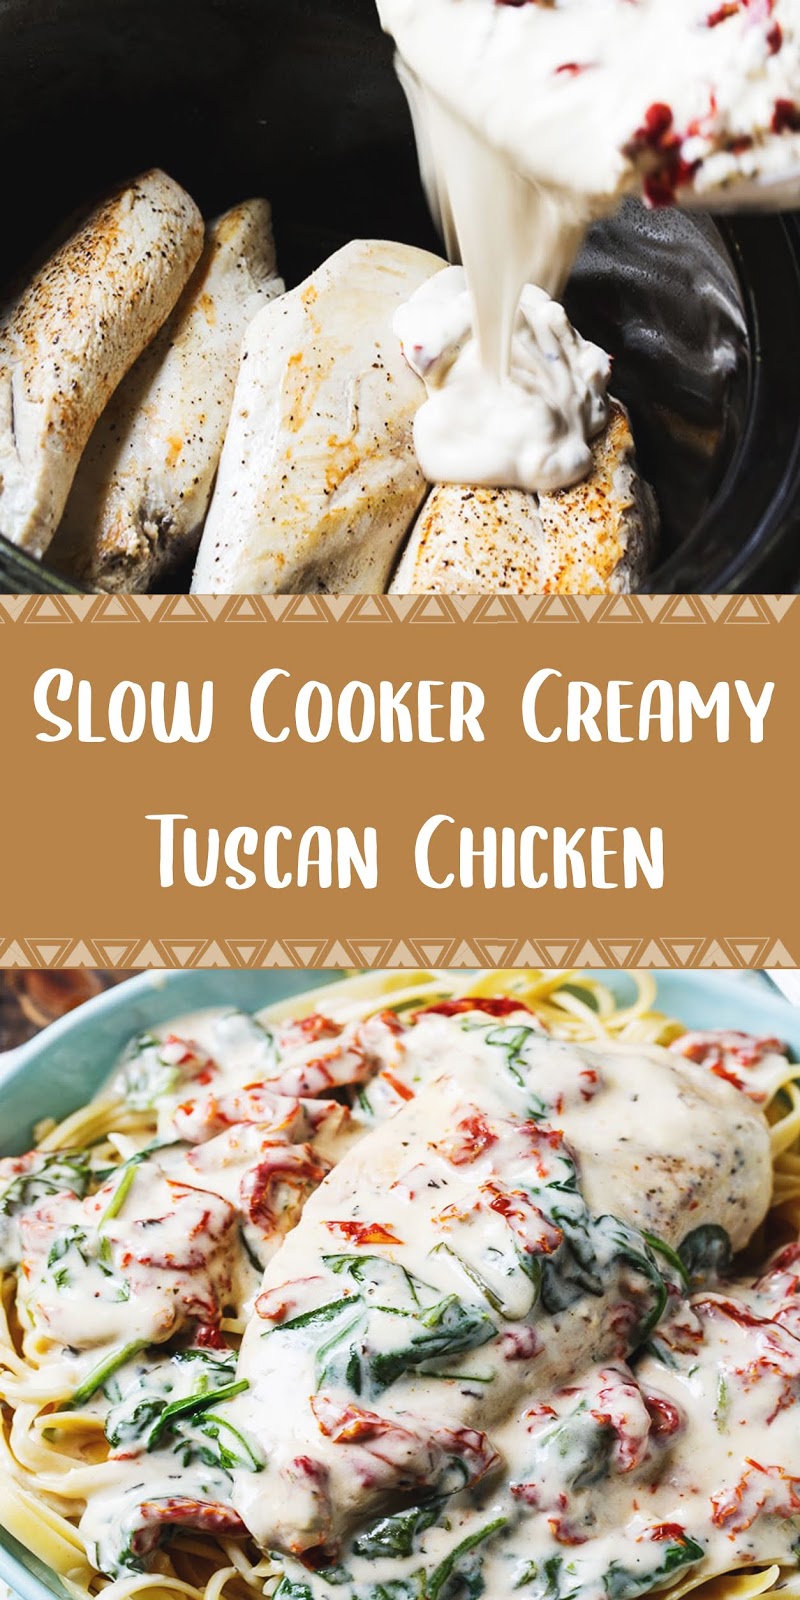 Slow Cooker Creamy Tuscan Chicken - Cindy Glover